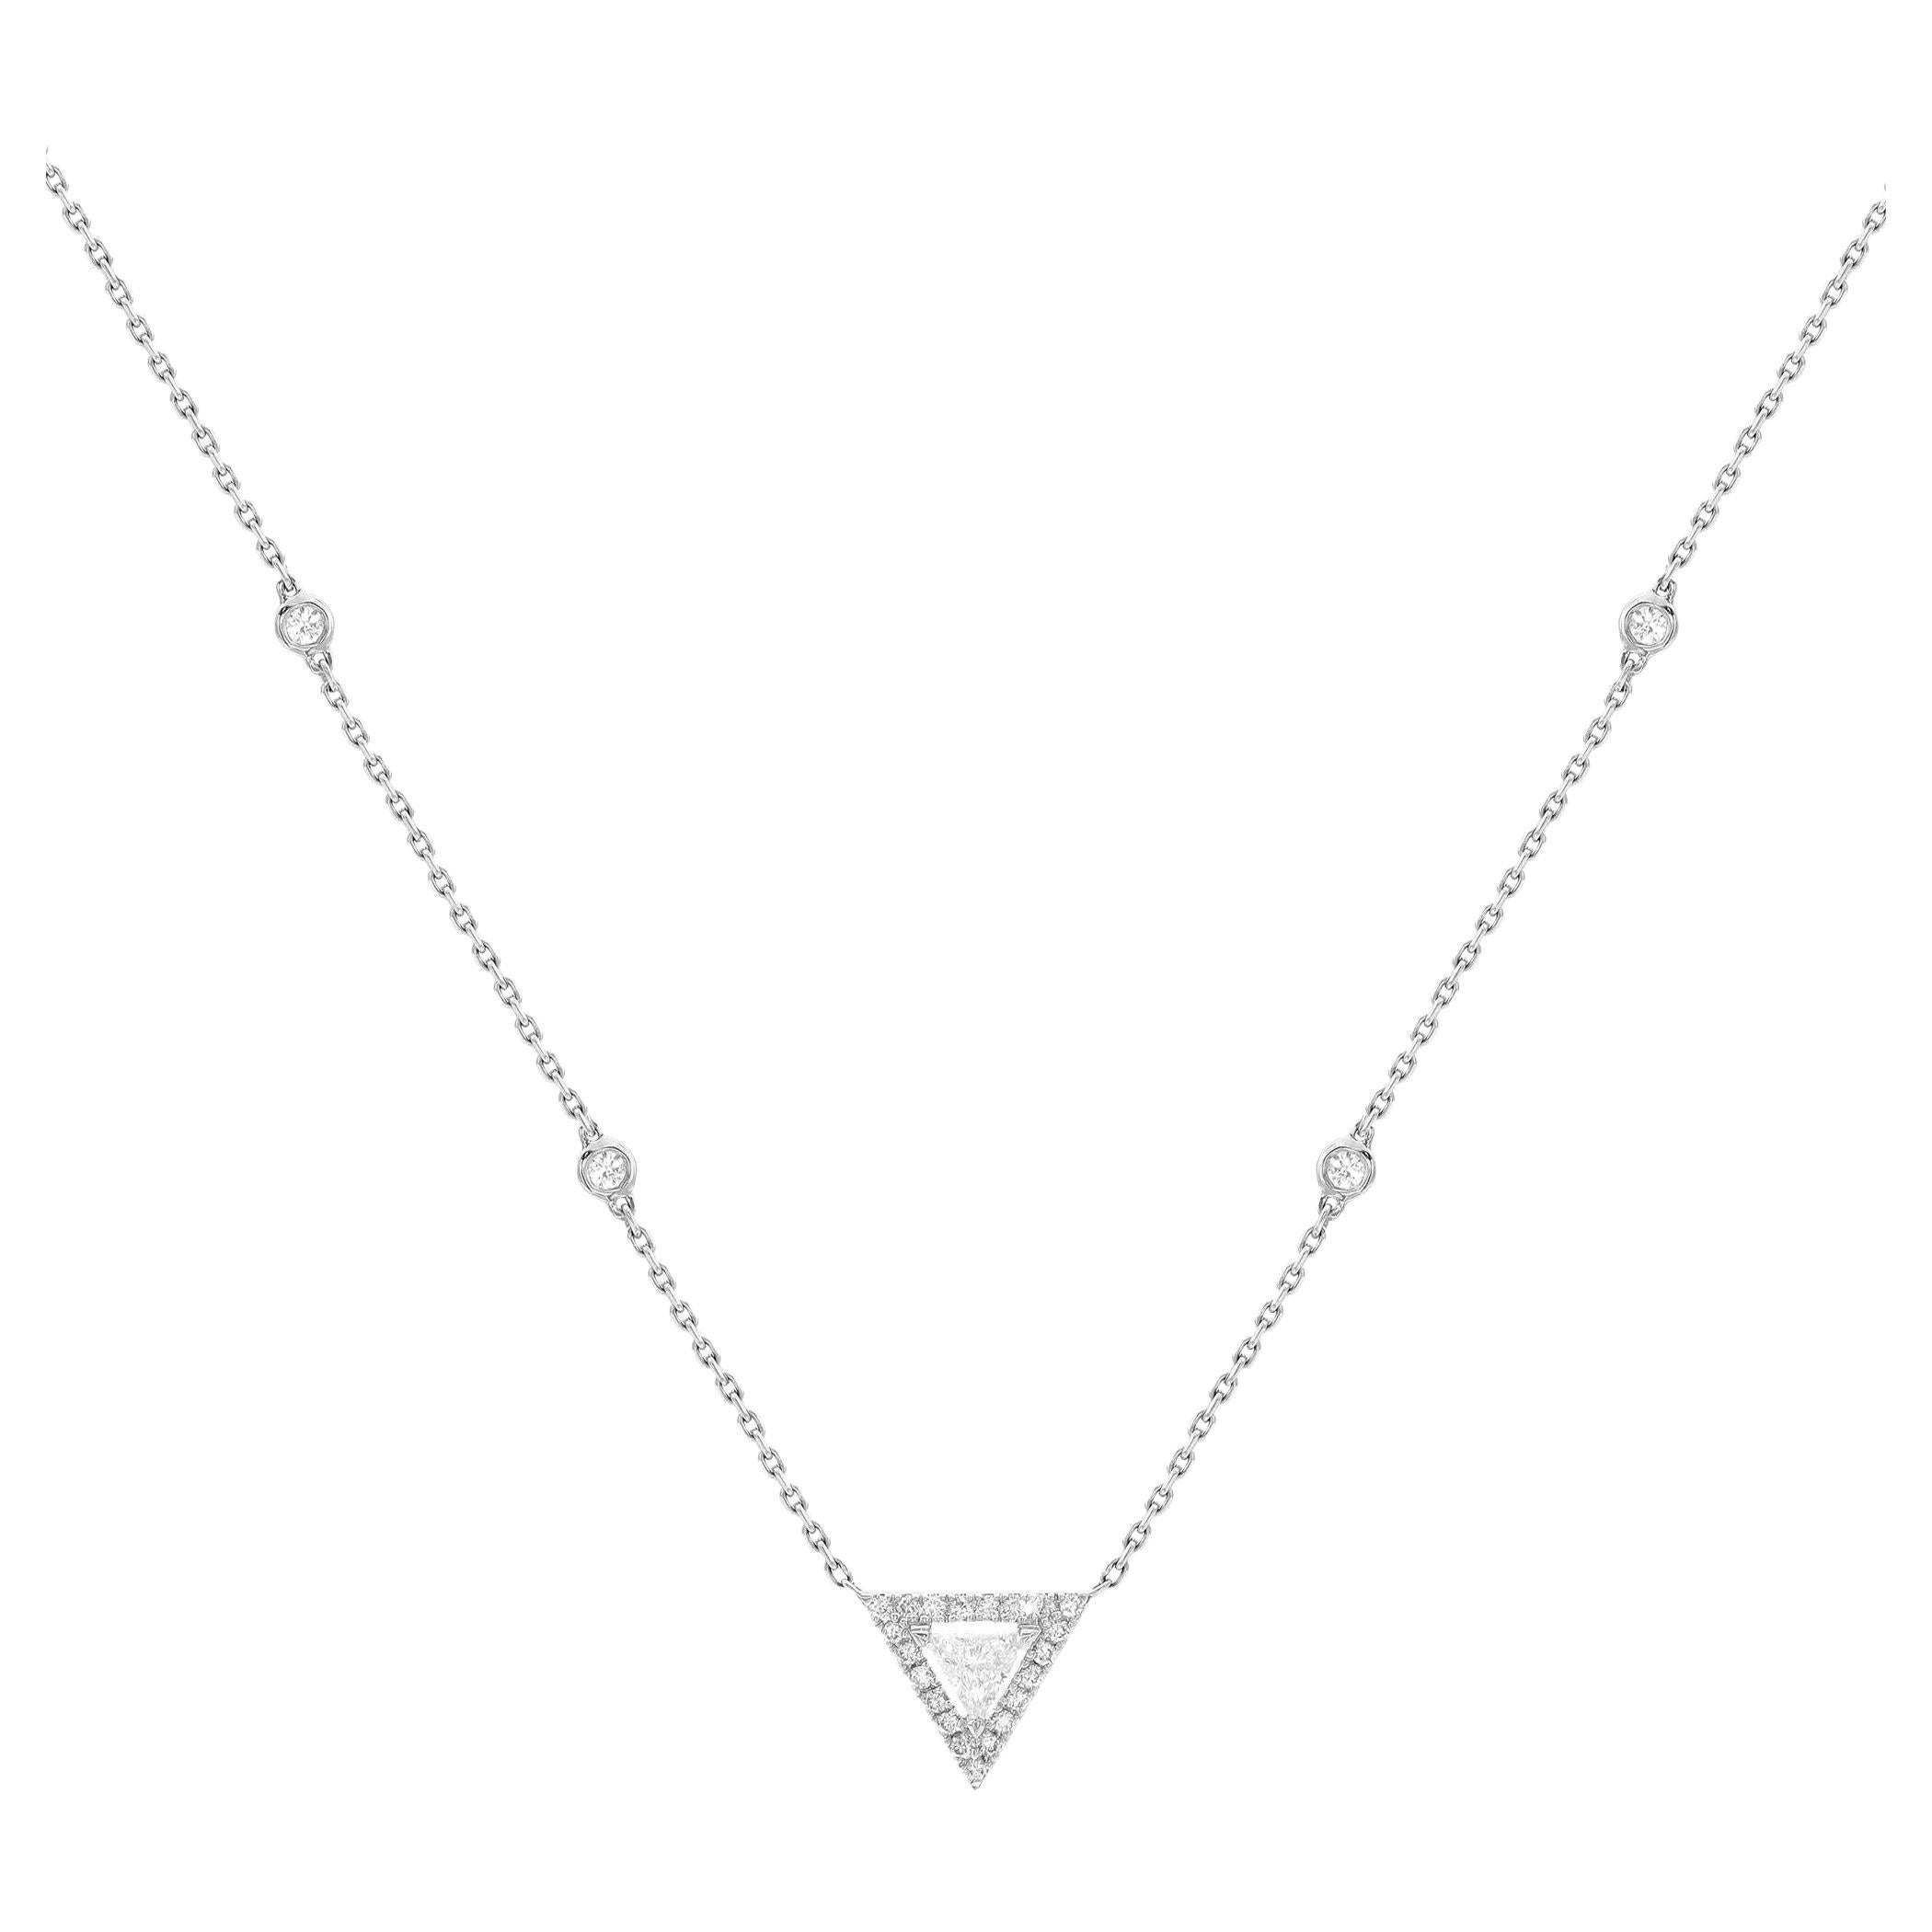 Messika 0.47Cttw Thea Diamond Chain Necklace 18K White Gold 17.5 Inches For Sale